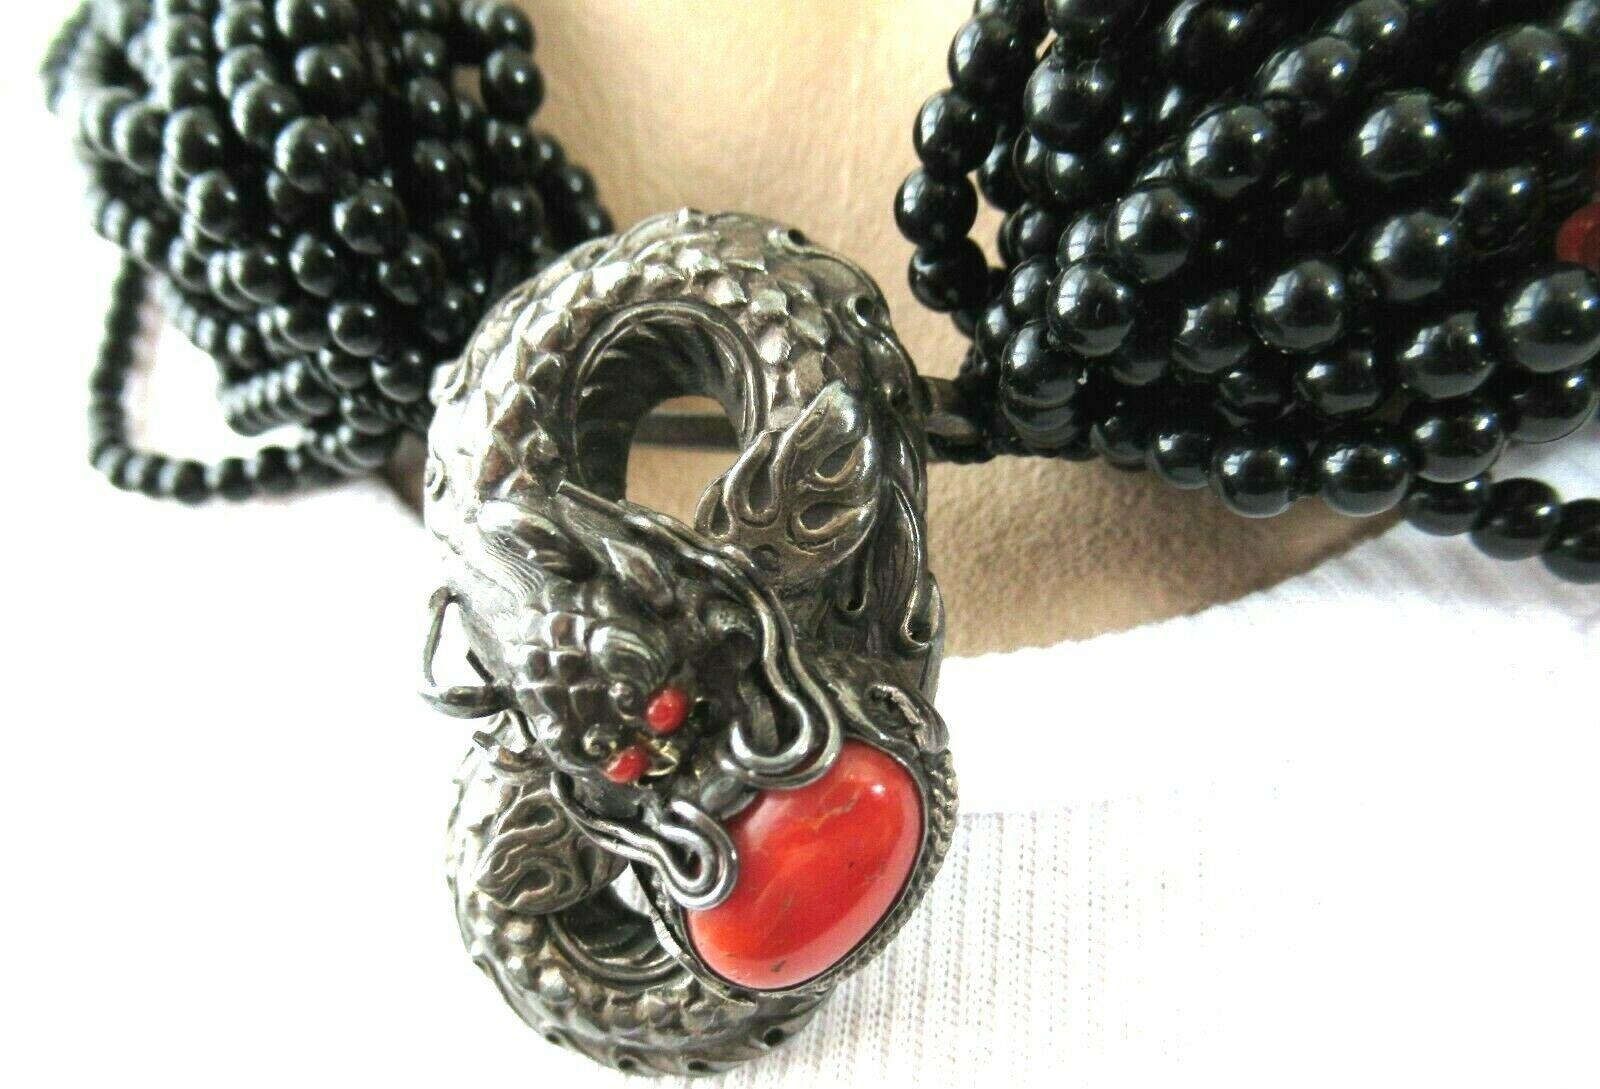 Simply Beautiful Designer Multi Strand Black Onyx and Coral Beads Necklace, suspending a Silver Dragon holding a securely set Coral stone. Seahorse logo on clasp and reverse marked SILVER. Silver tone mountings. Necklace measures approx. 20